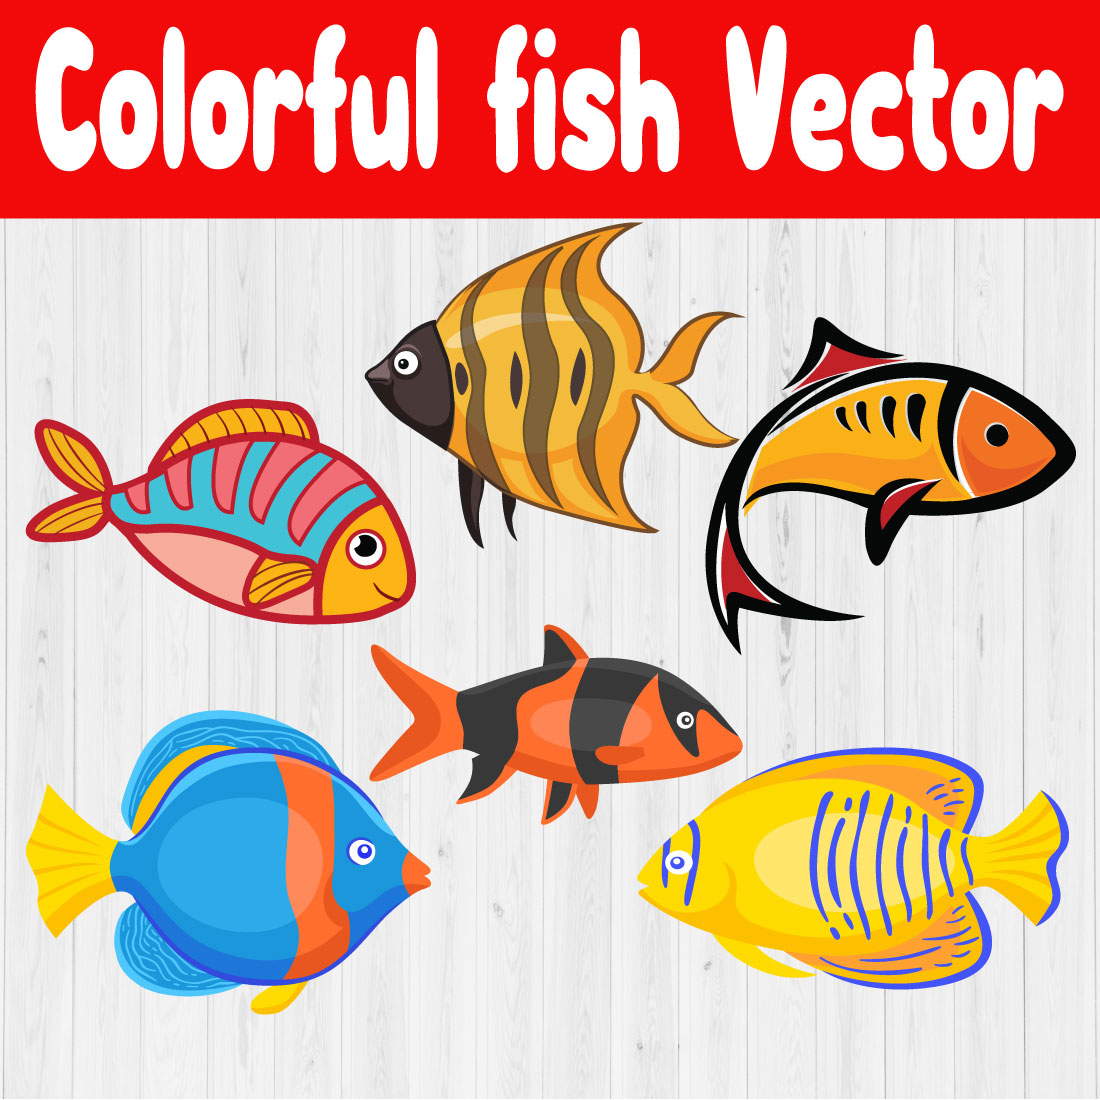 Colorful Fish Vector Set vol2 cover image.